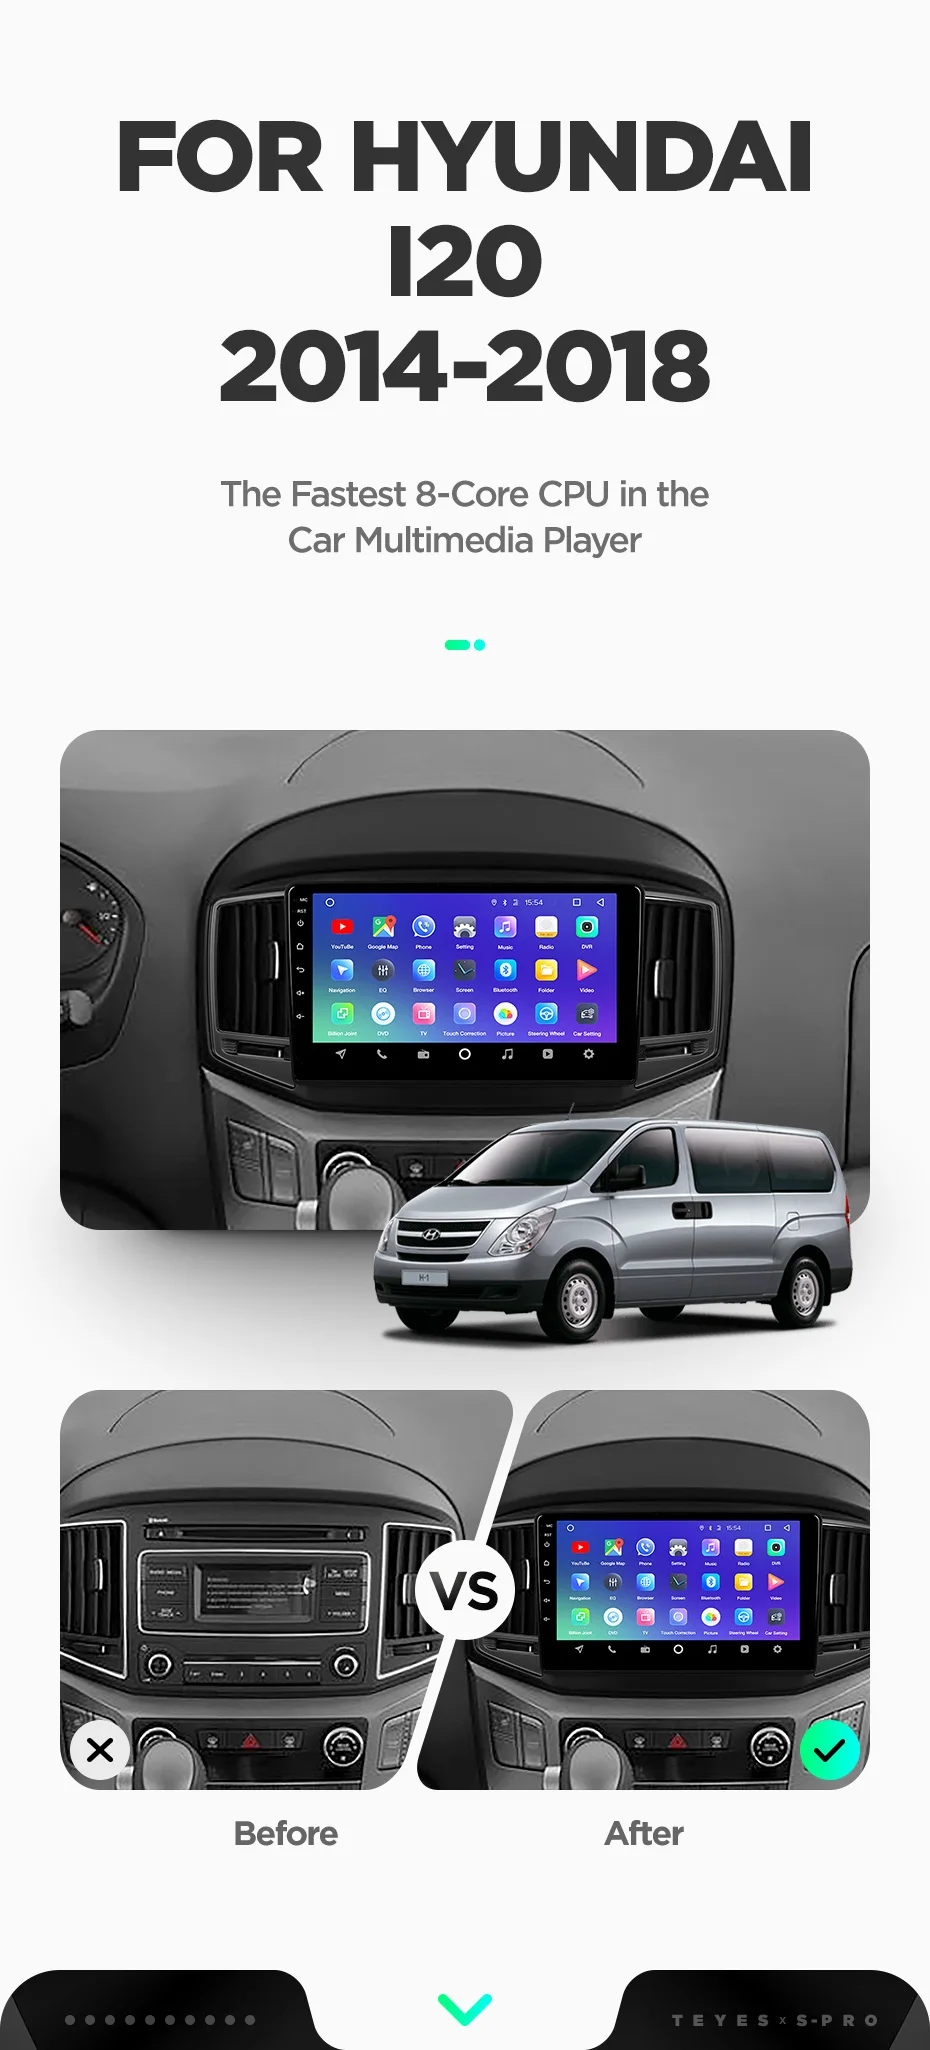 Discount TEYES SPRO For Hyundai H1 2 Starex 2017-2018 Android Navigation GPS No 2 din dvd Car Radio Multimedia Video Player 4